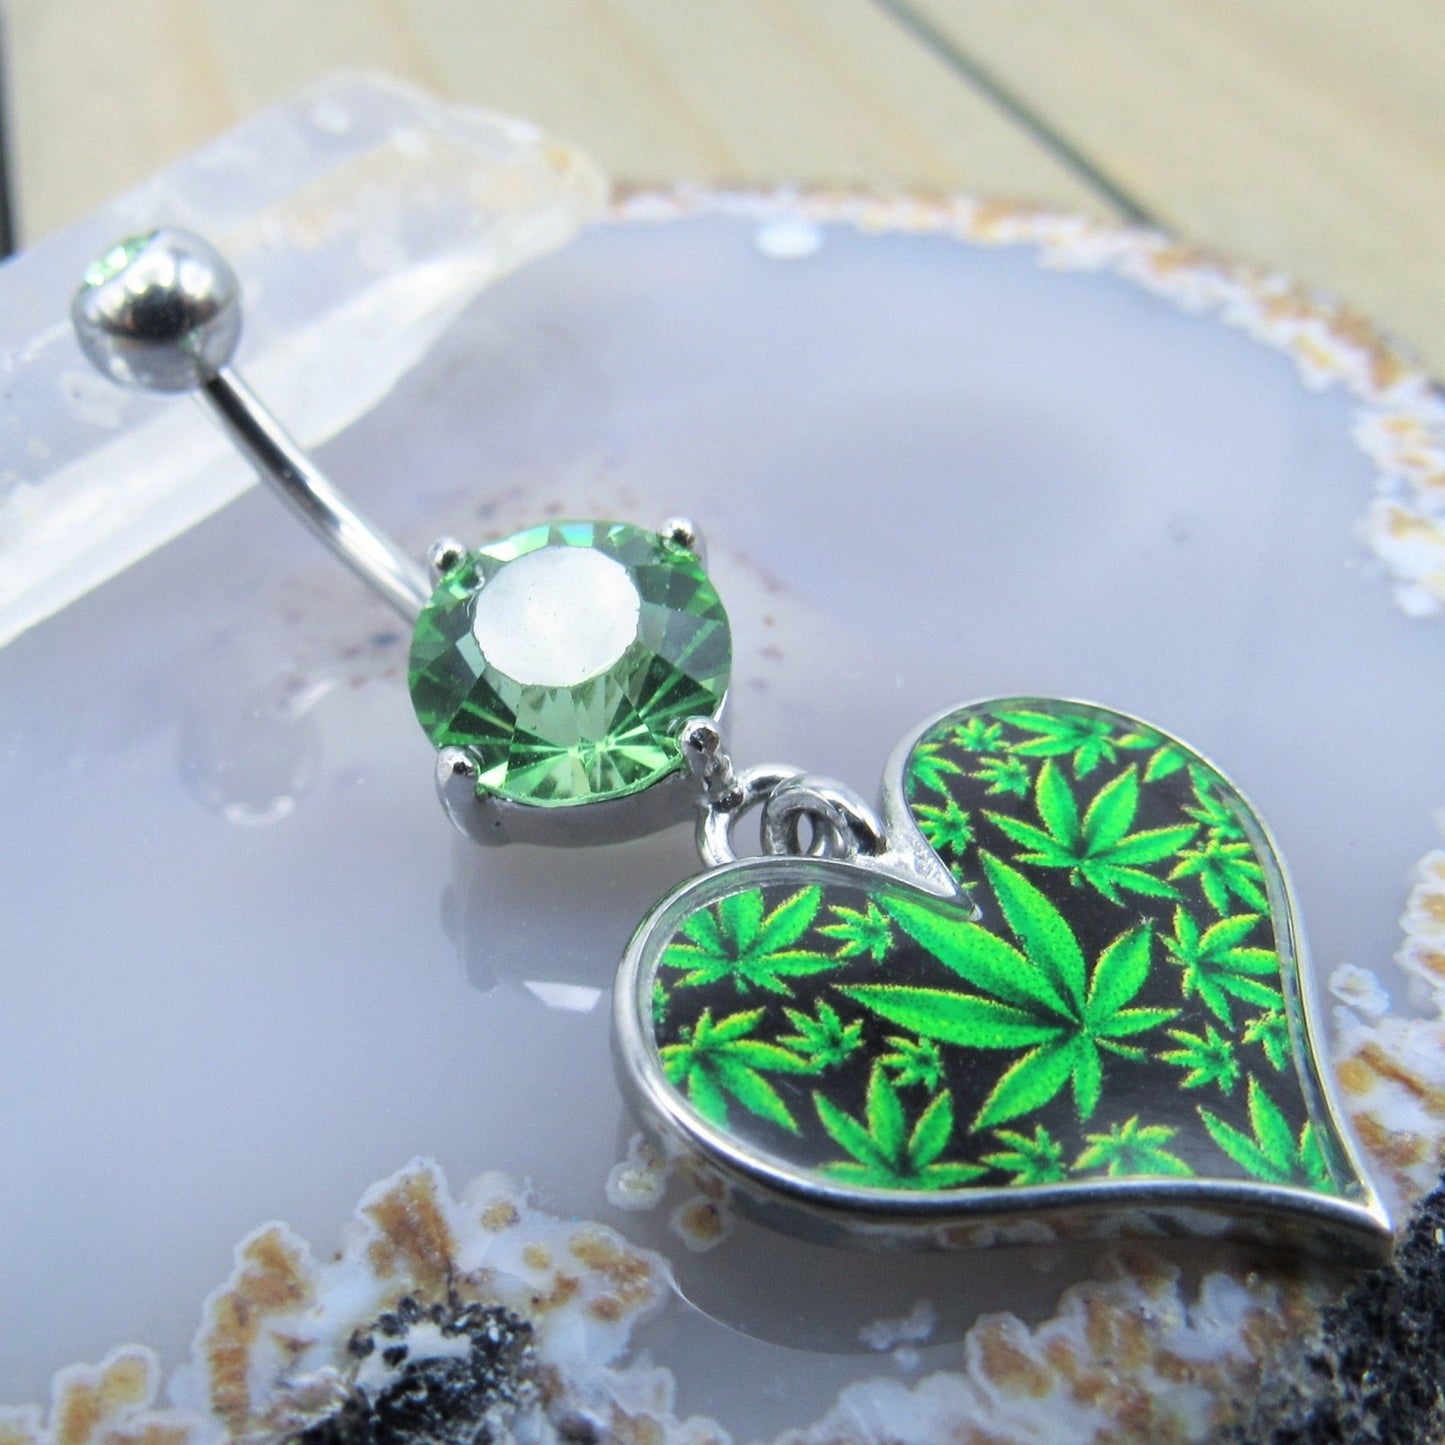 14g green gemstone heart weed dangle belly button piercing ring 3/8" length silver 316L stainless steel body jewelry - Siren Body Jewelry